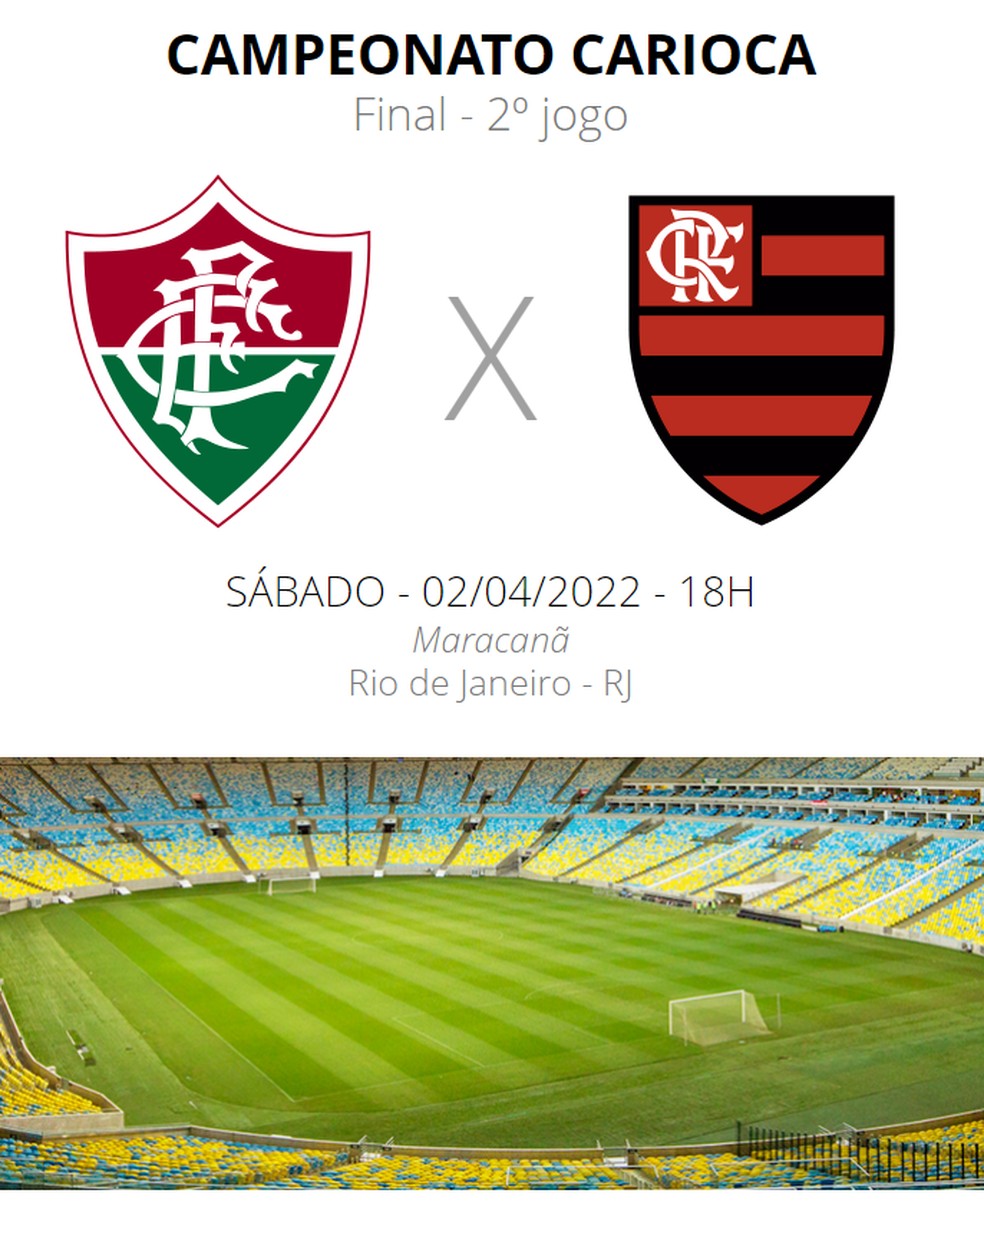 Sport Recife vs. Tombense: An Exciting Clash of Football Giants